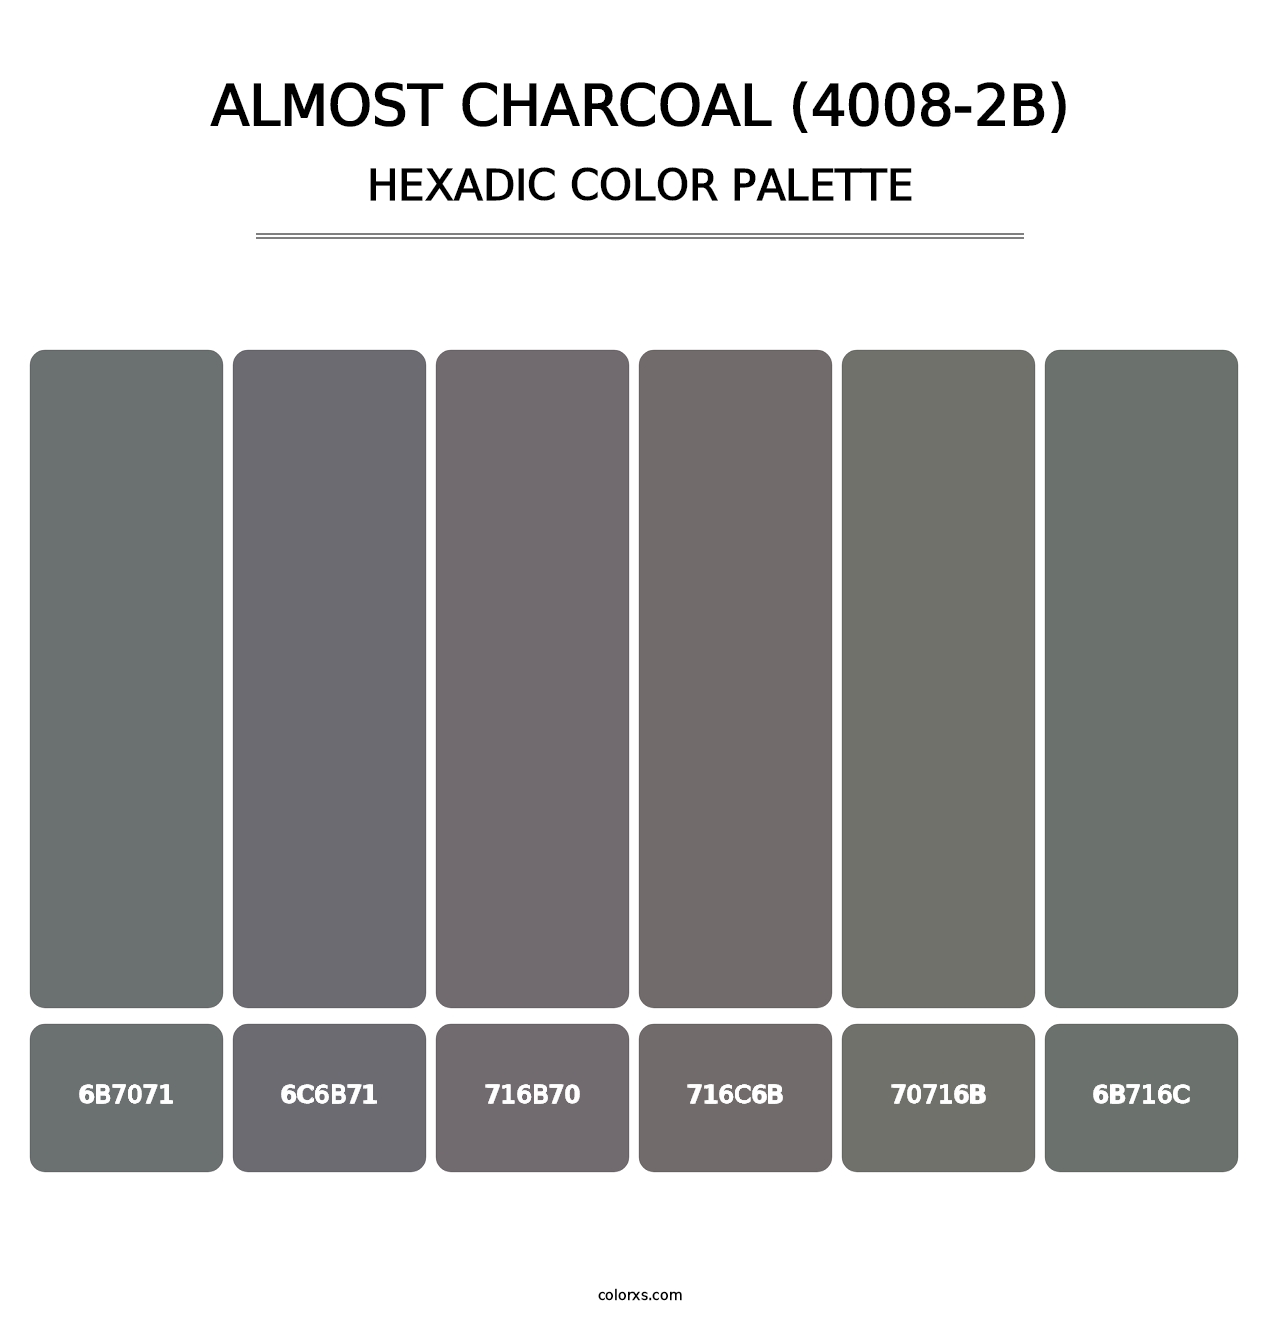 Almost Charcoal (4008-2B) - Hexadic Color Palette